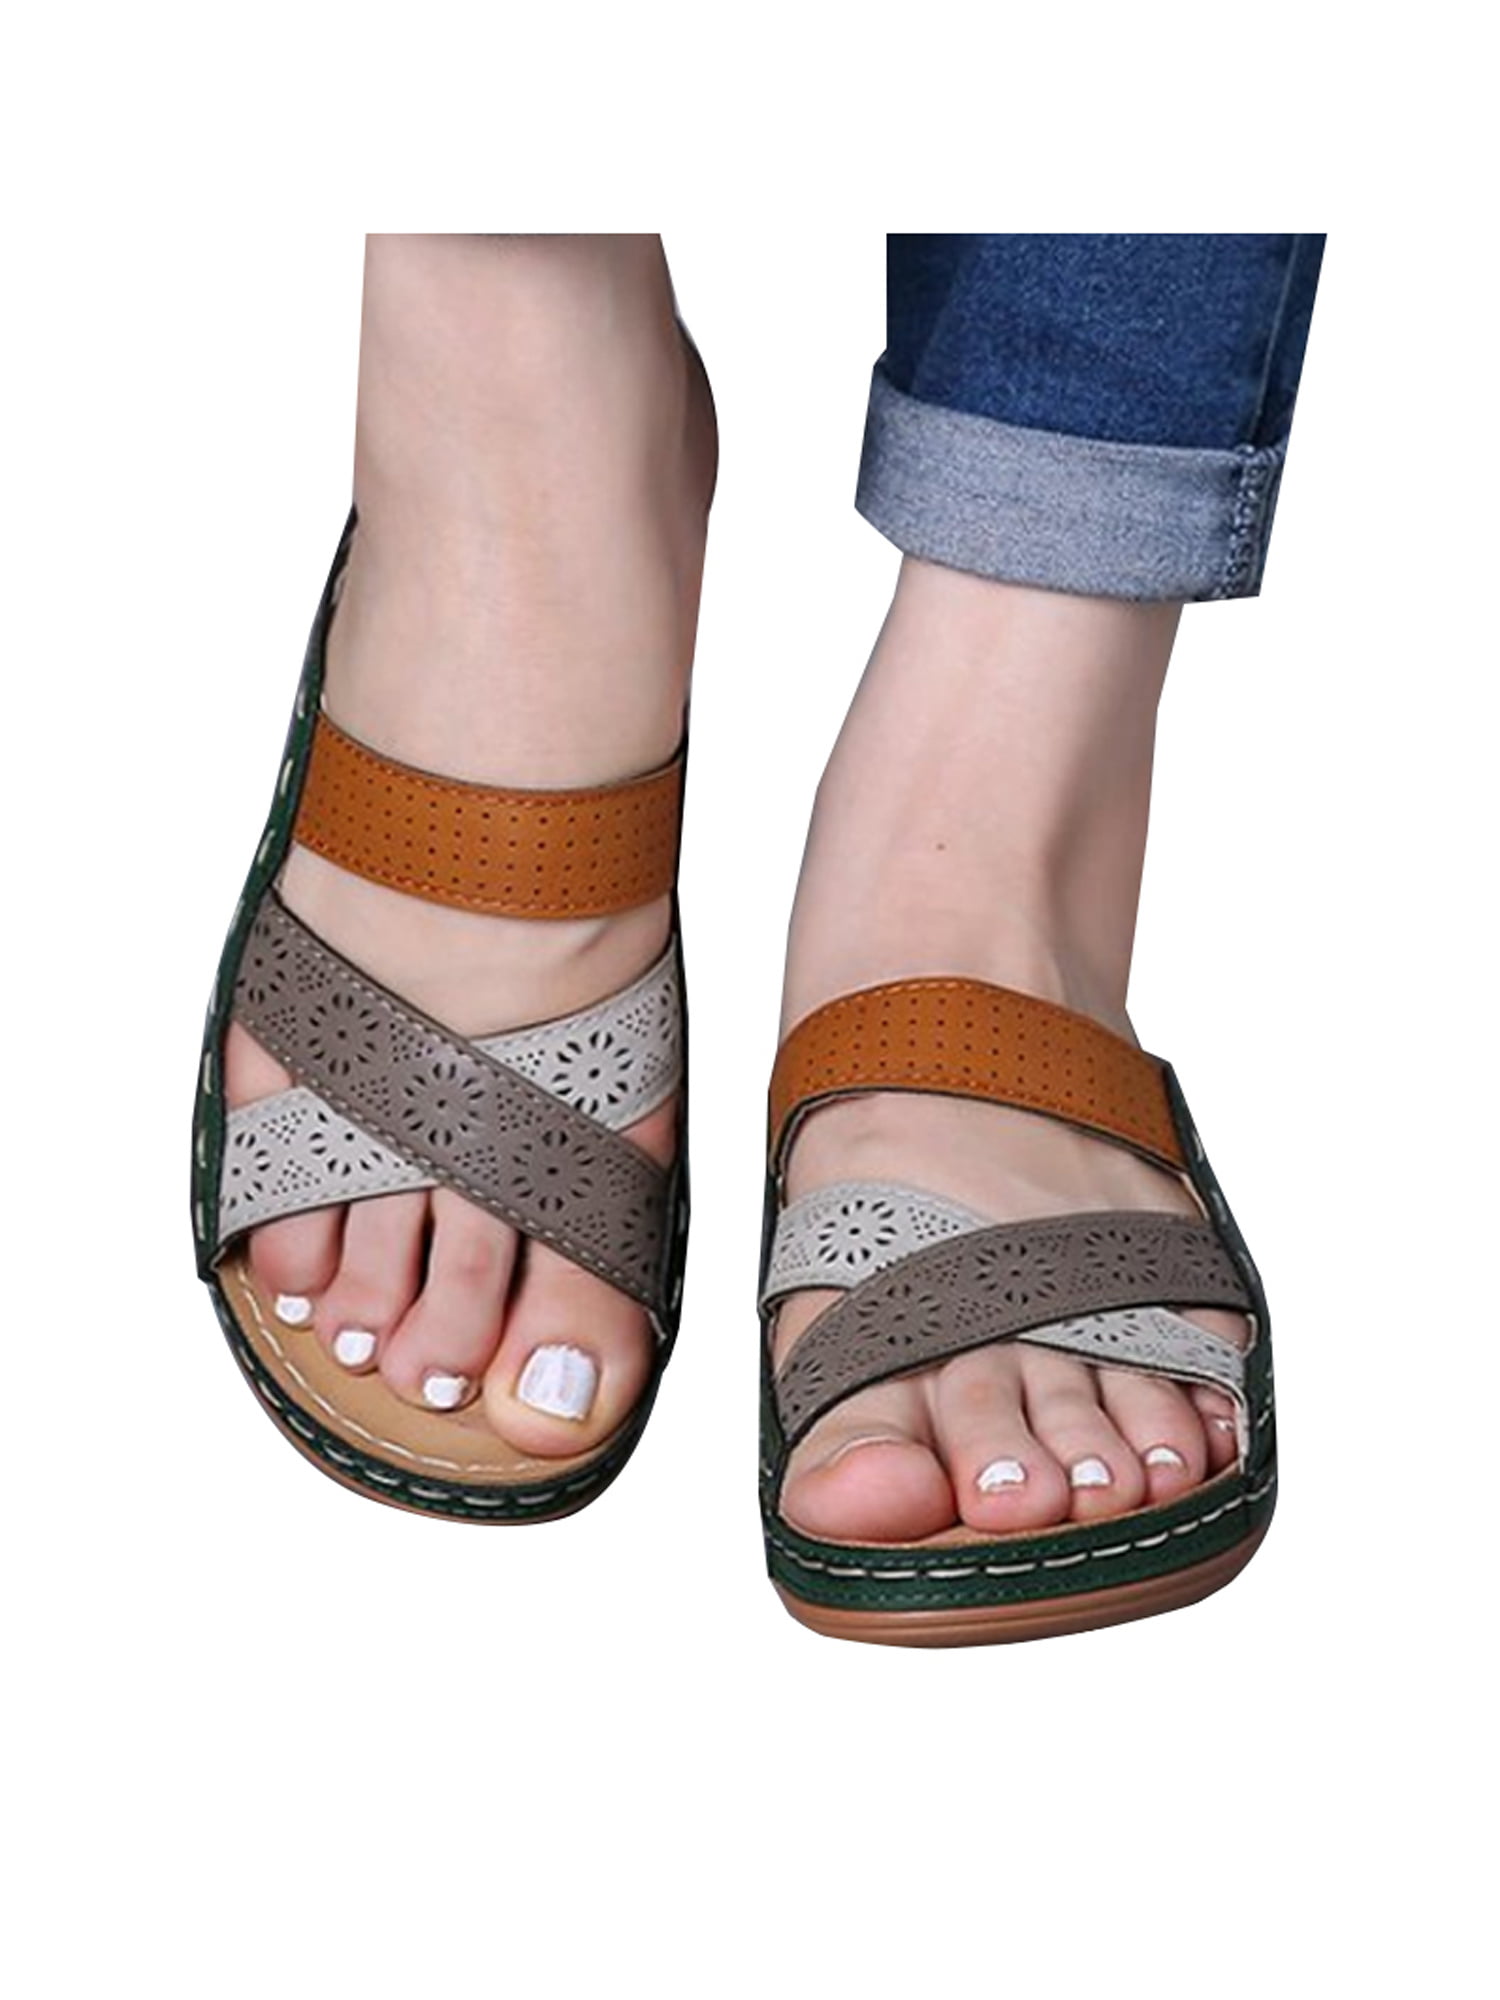 Leather Sandals Flat Open Toe Sandals for Women